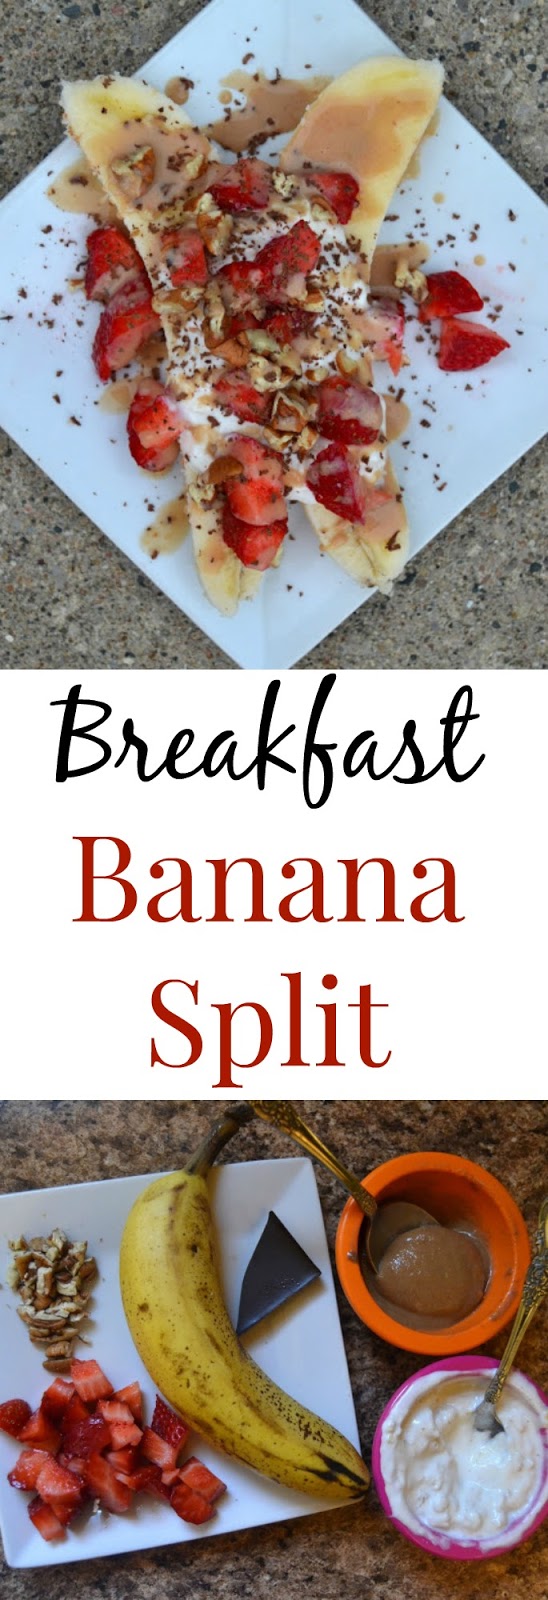 Breakfast Banana Split- all the flavors of your banana split but healthy enough to eat for breakfast! www.nutritionistreviews.com